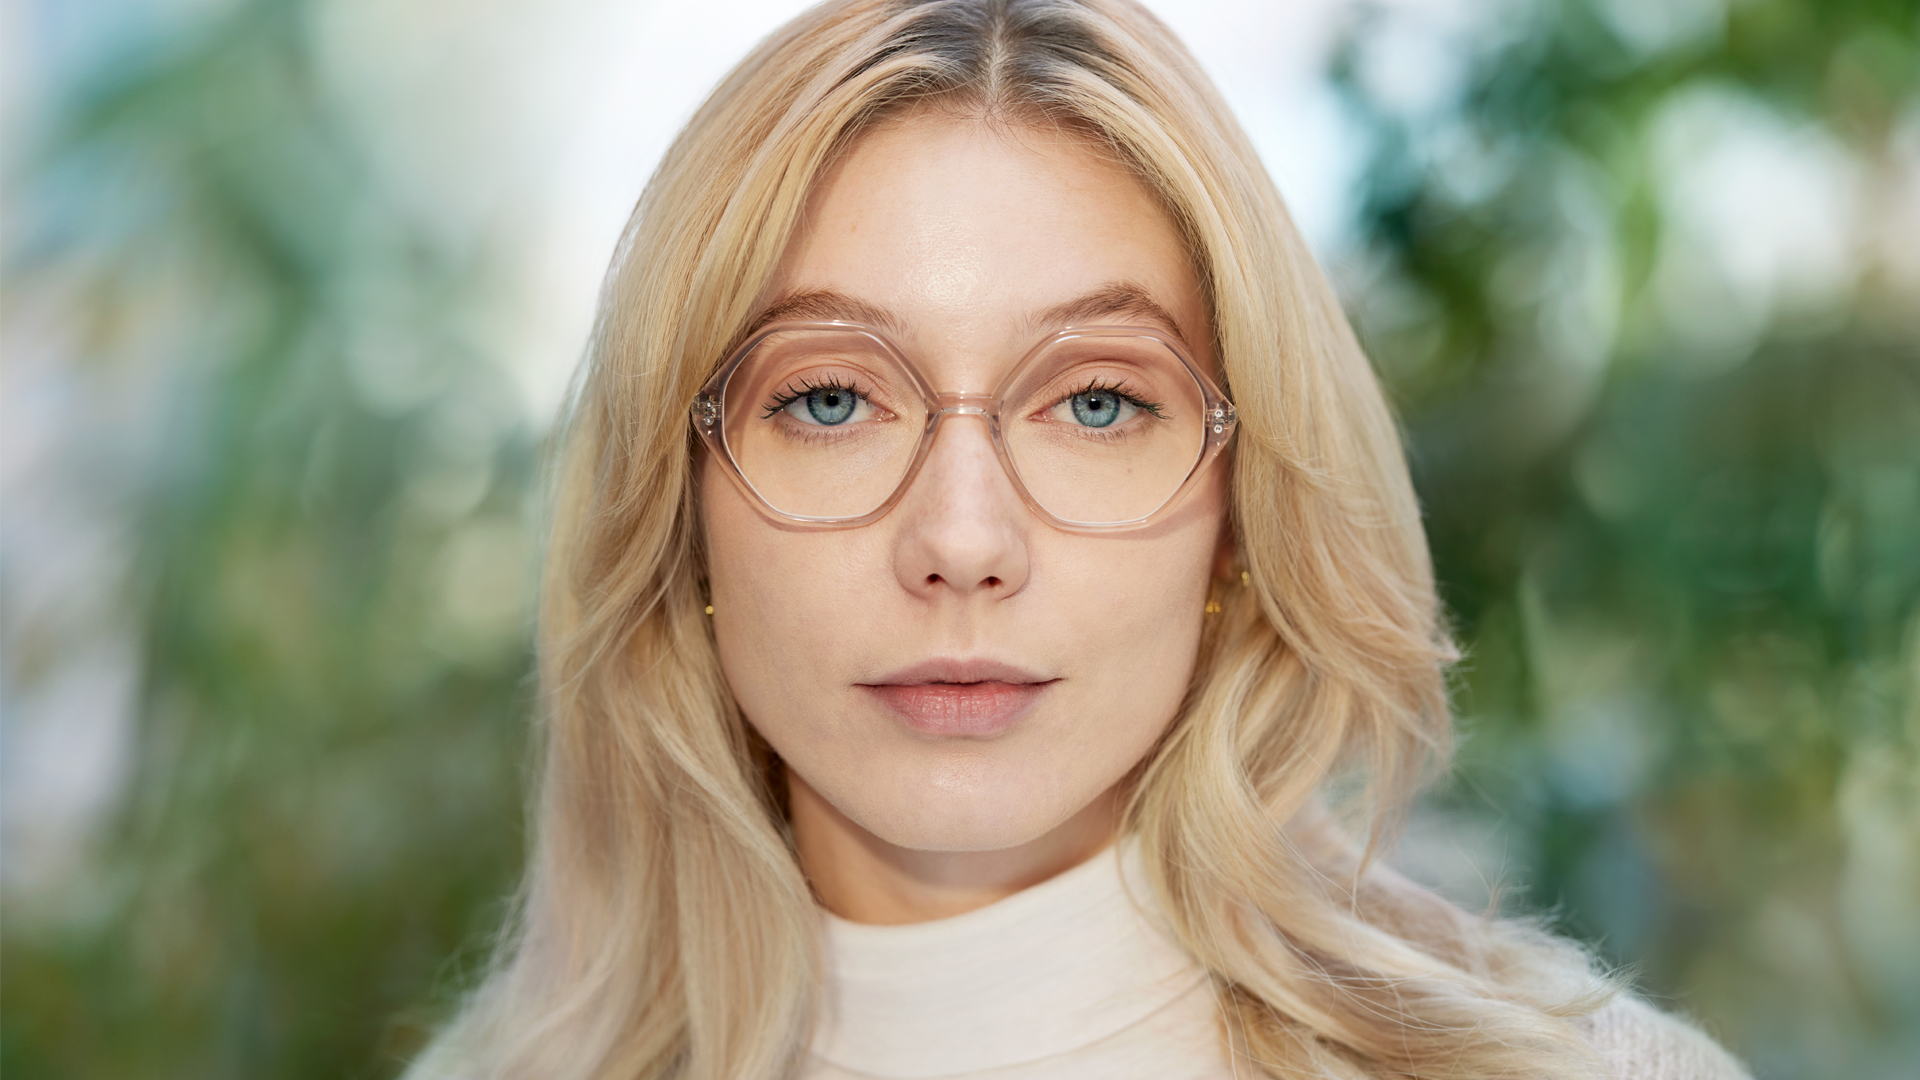 A blonde woman wearing fashionable spectacles with transparent frames, against a backdrop to out-of-focus trees